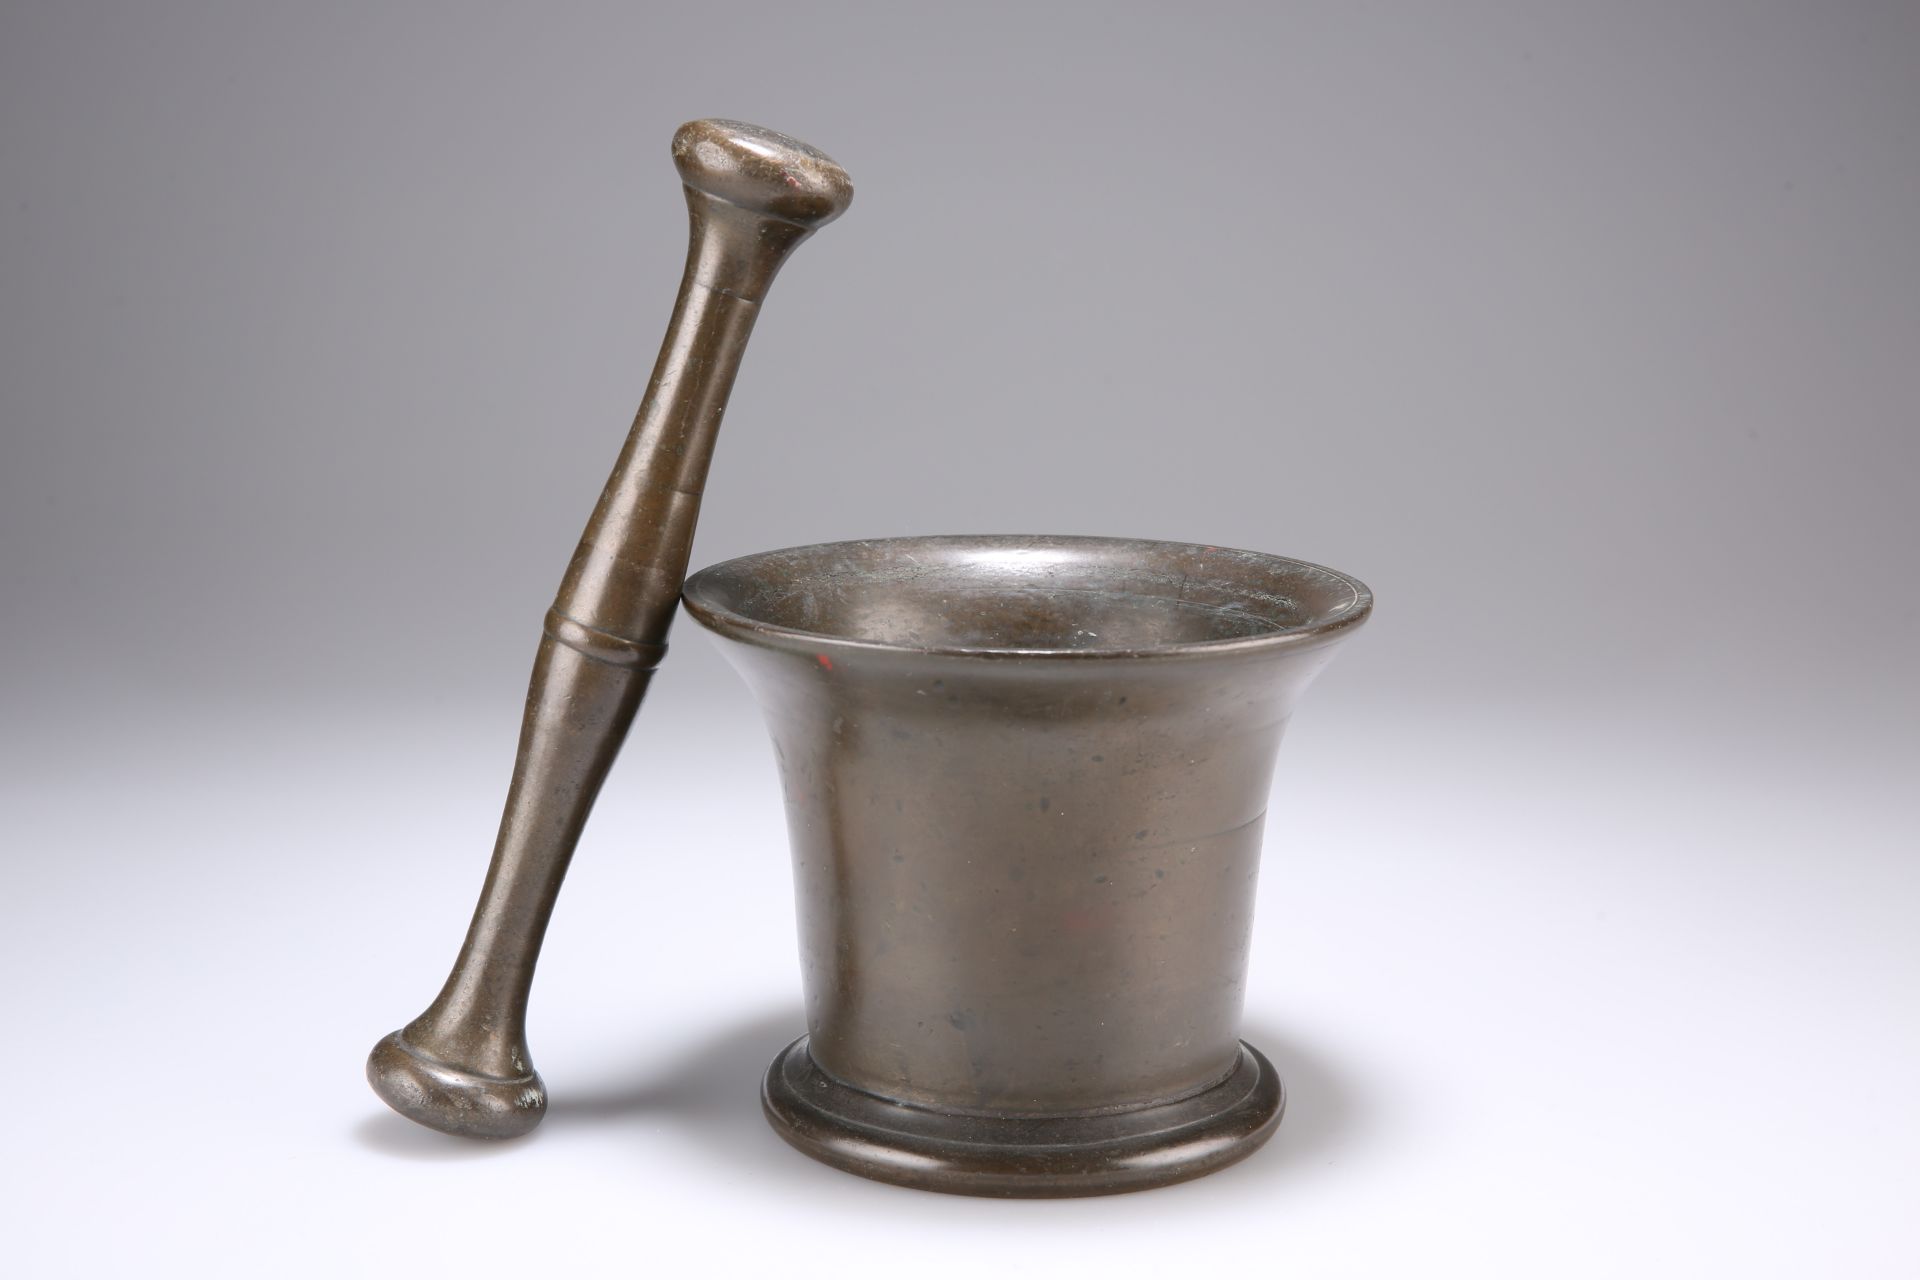 AN 18TH CENTURY BRONZE PESTLE AND MORTAR. Mortar 11.5cm highThe absence of a Condition Report does